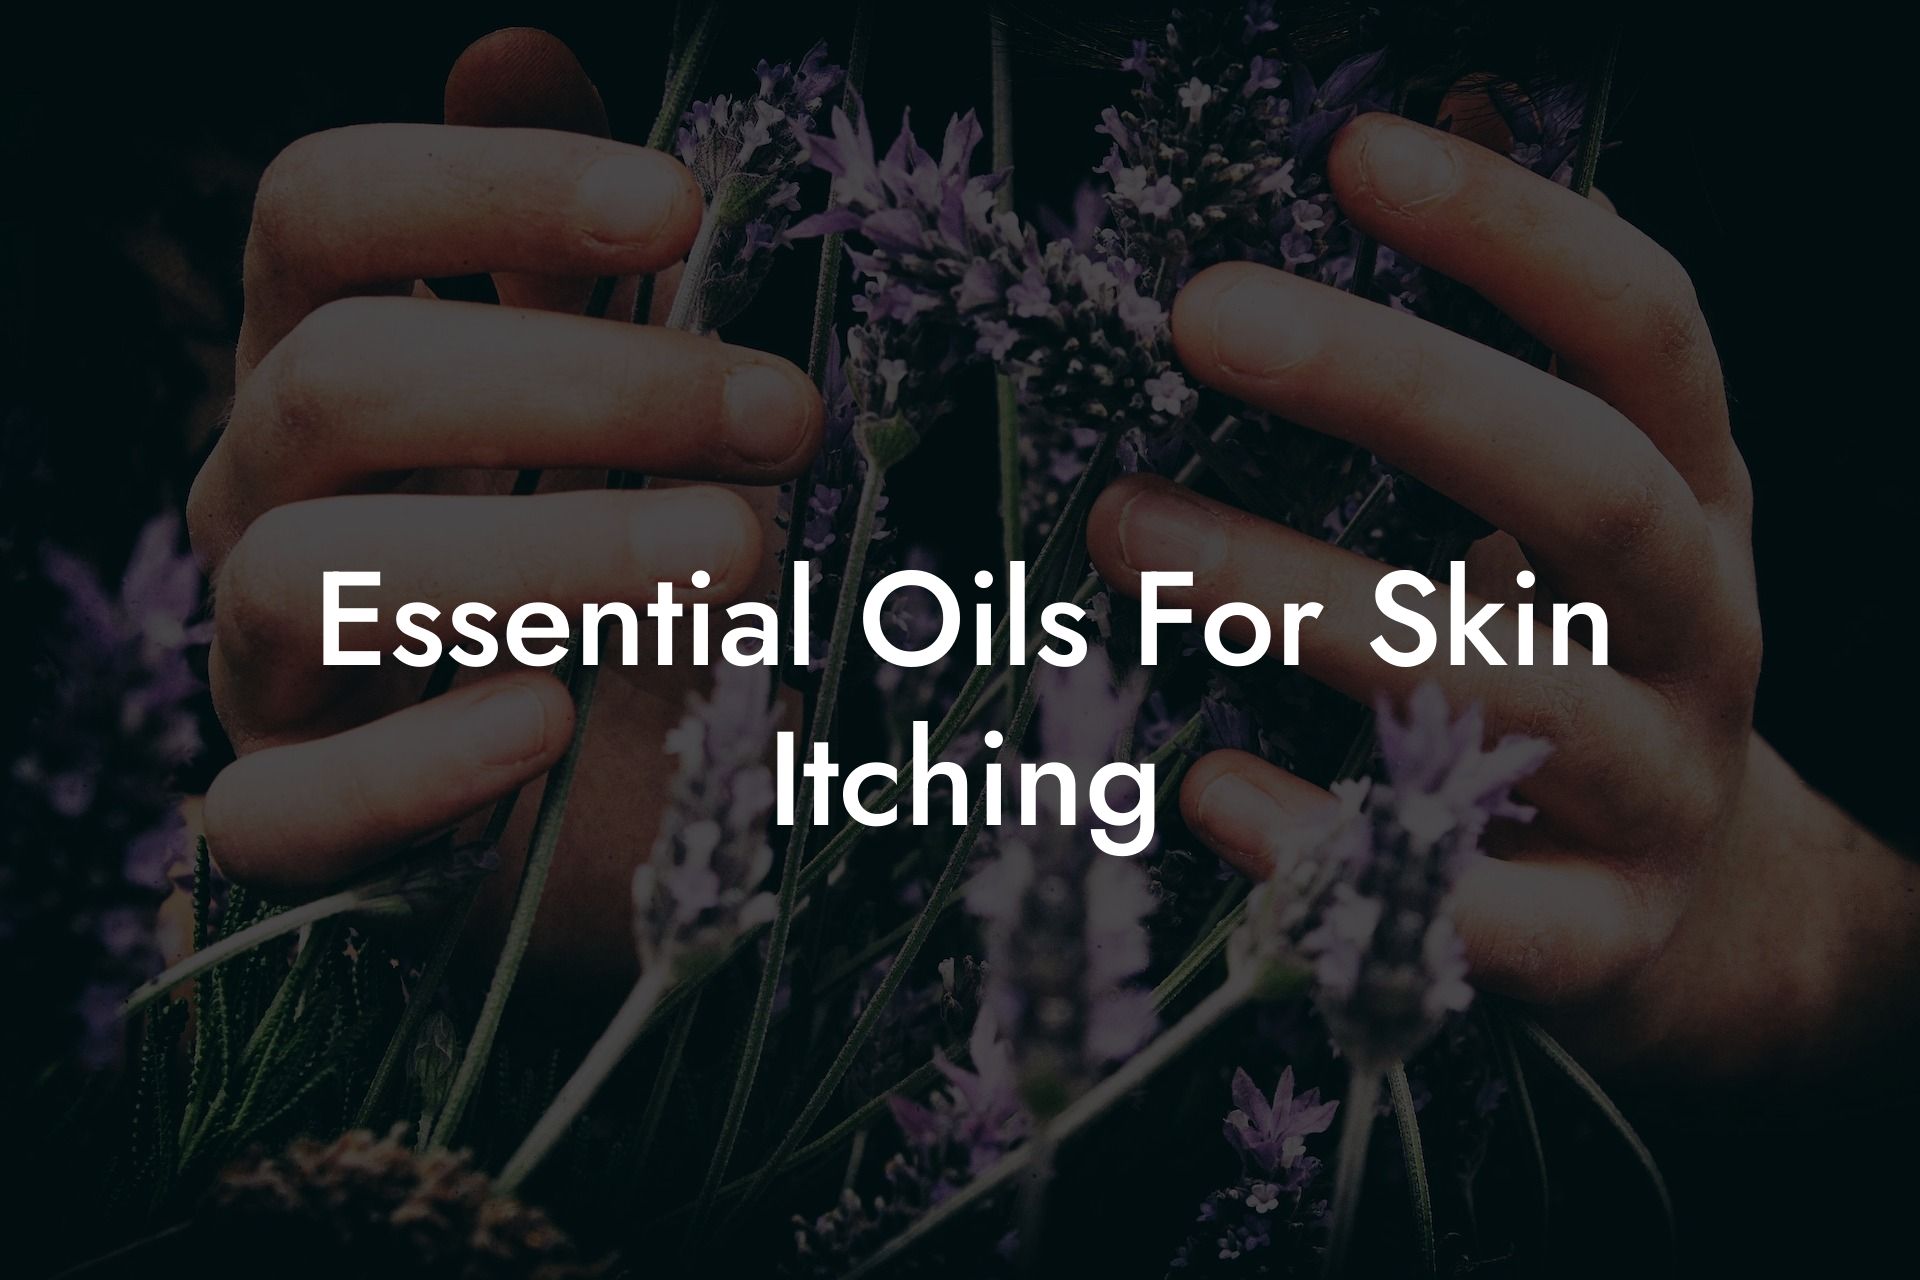 Essential Oils For Skin Itching